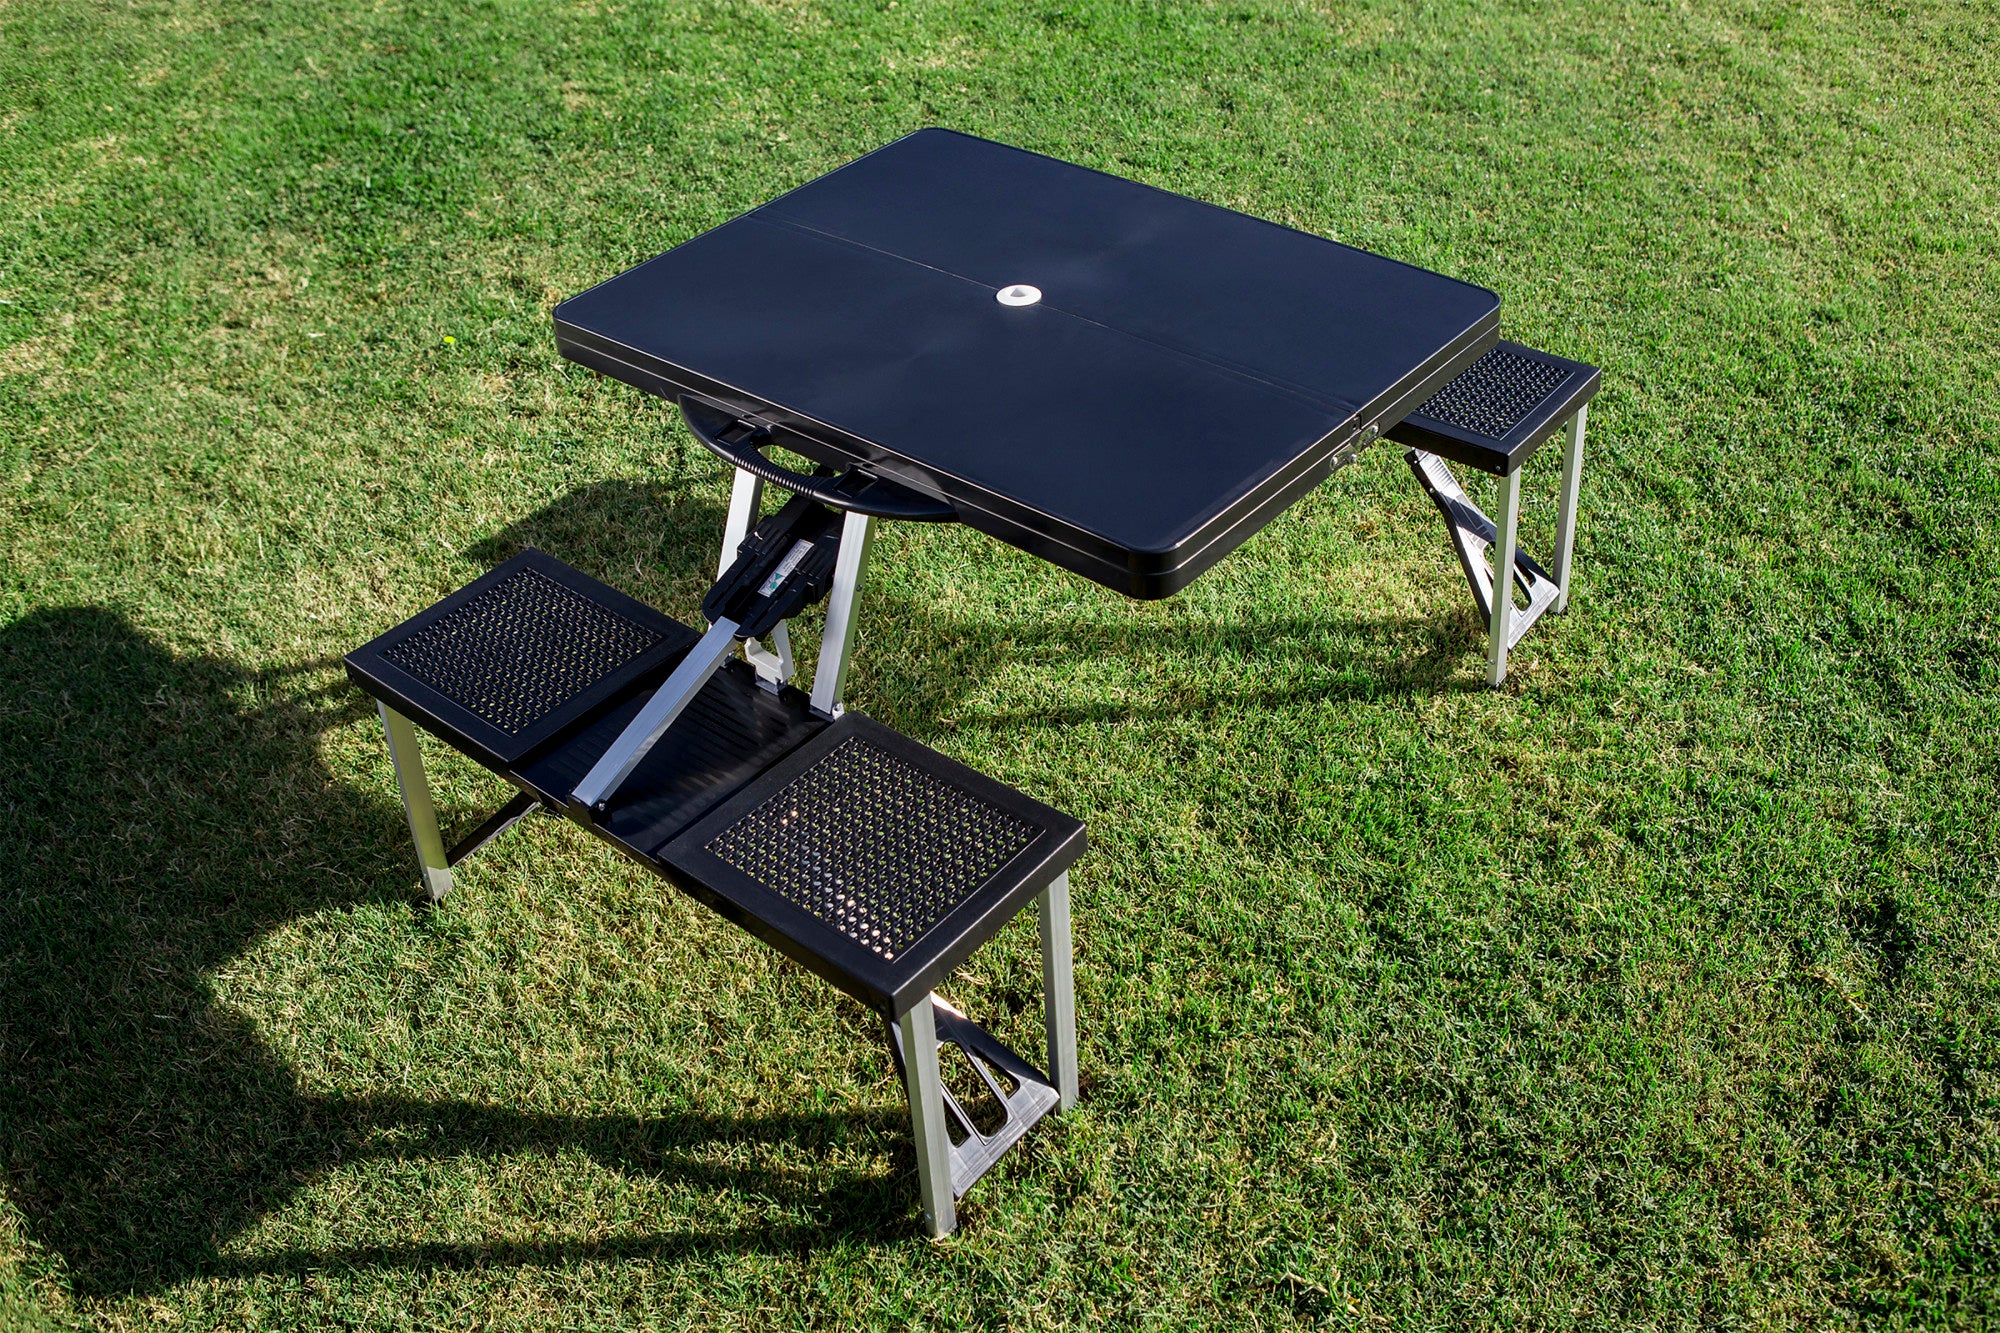 Edmonton Oilers - Picnic Table Portable Folding Table with Seats